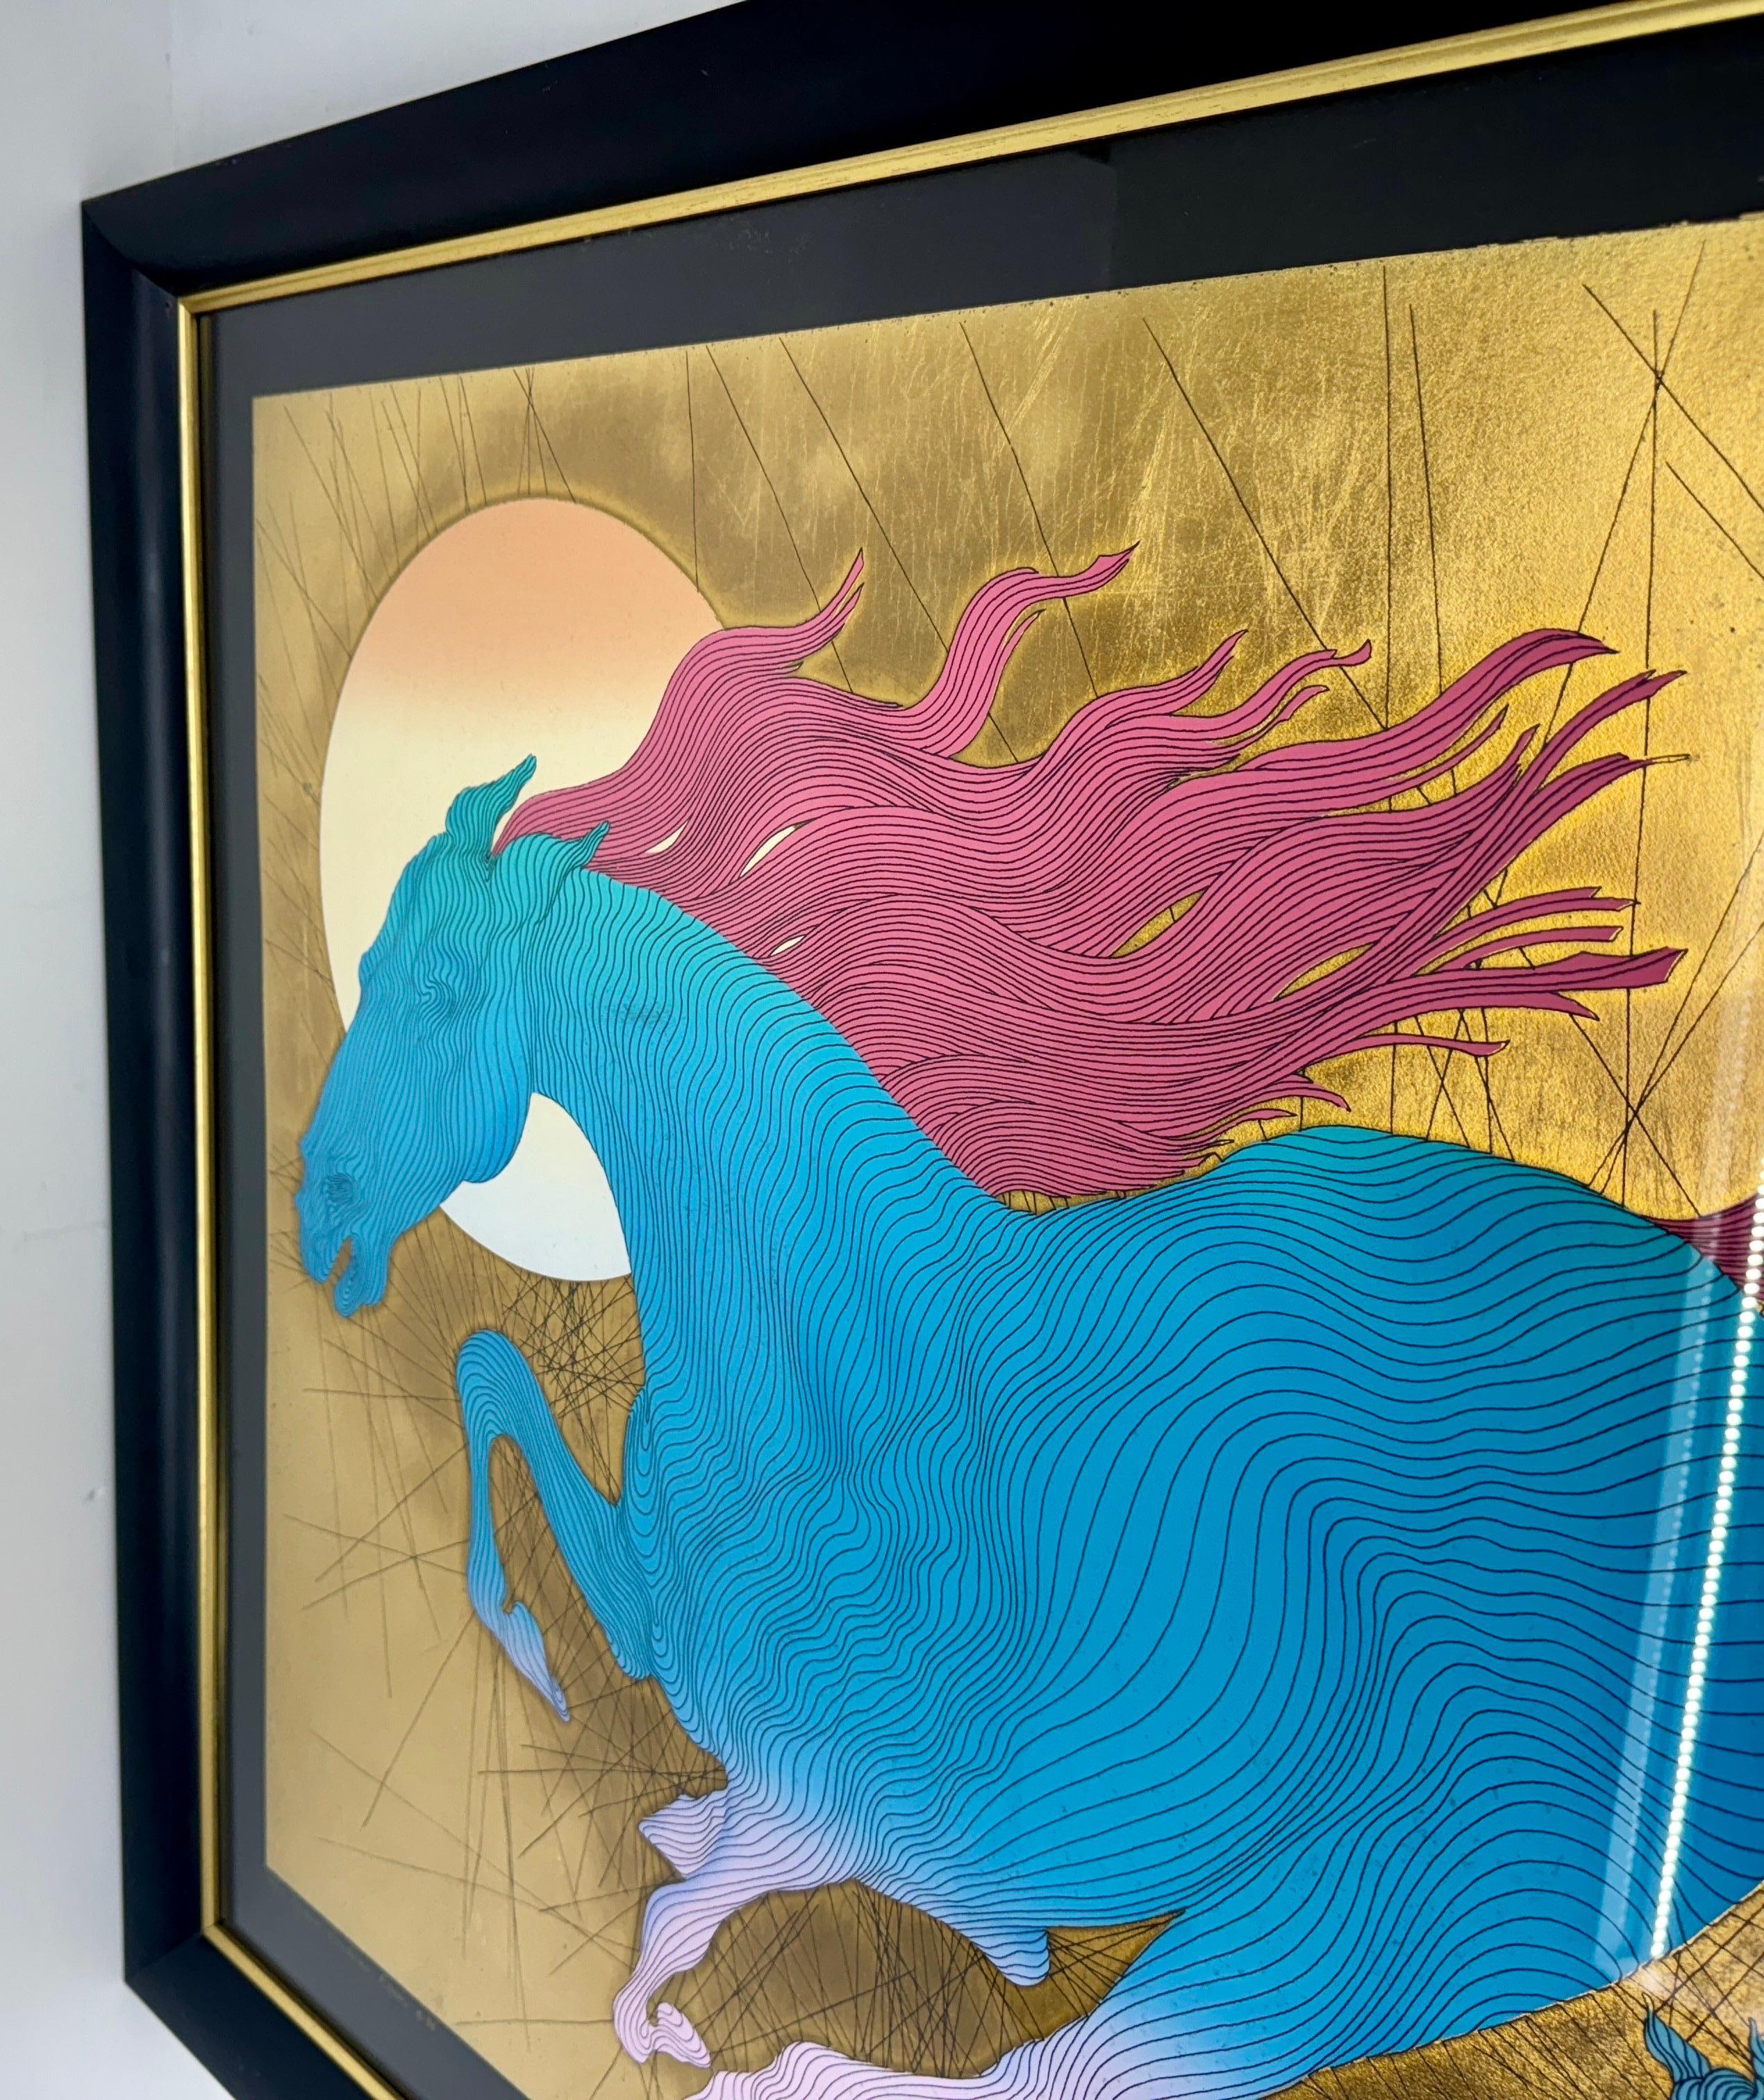 Contemporary Guillaume Azoulay Equus Gold Leaf Running Horse Serigraph Limited Edition 12/12 For Sale